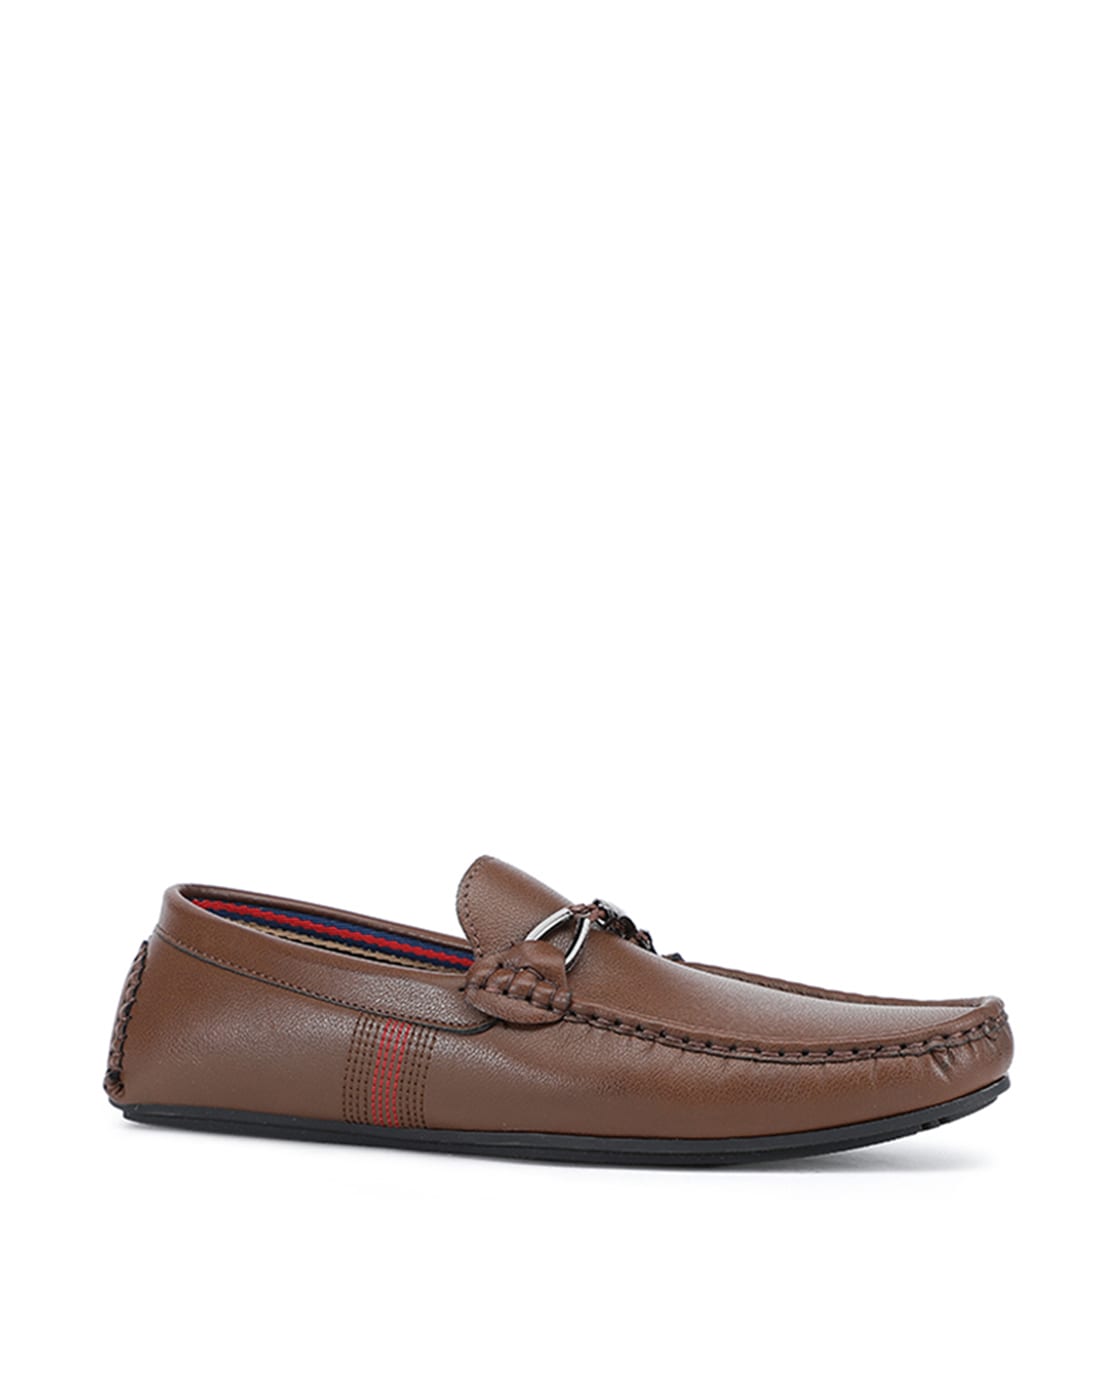 Buy Brown Casual Shoes for by Bata Online | Ajio.com